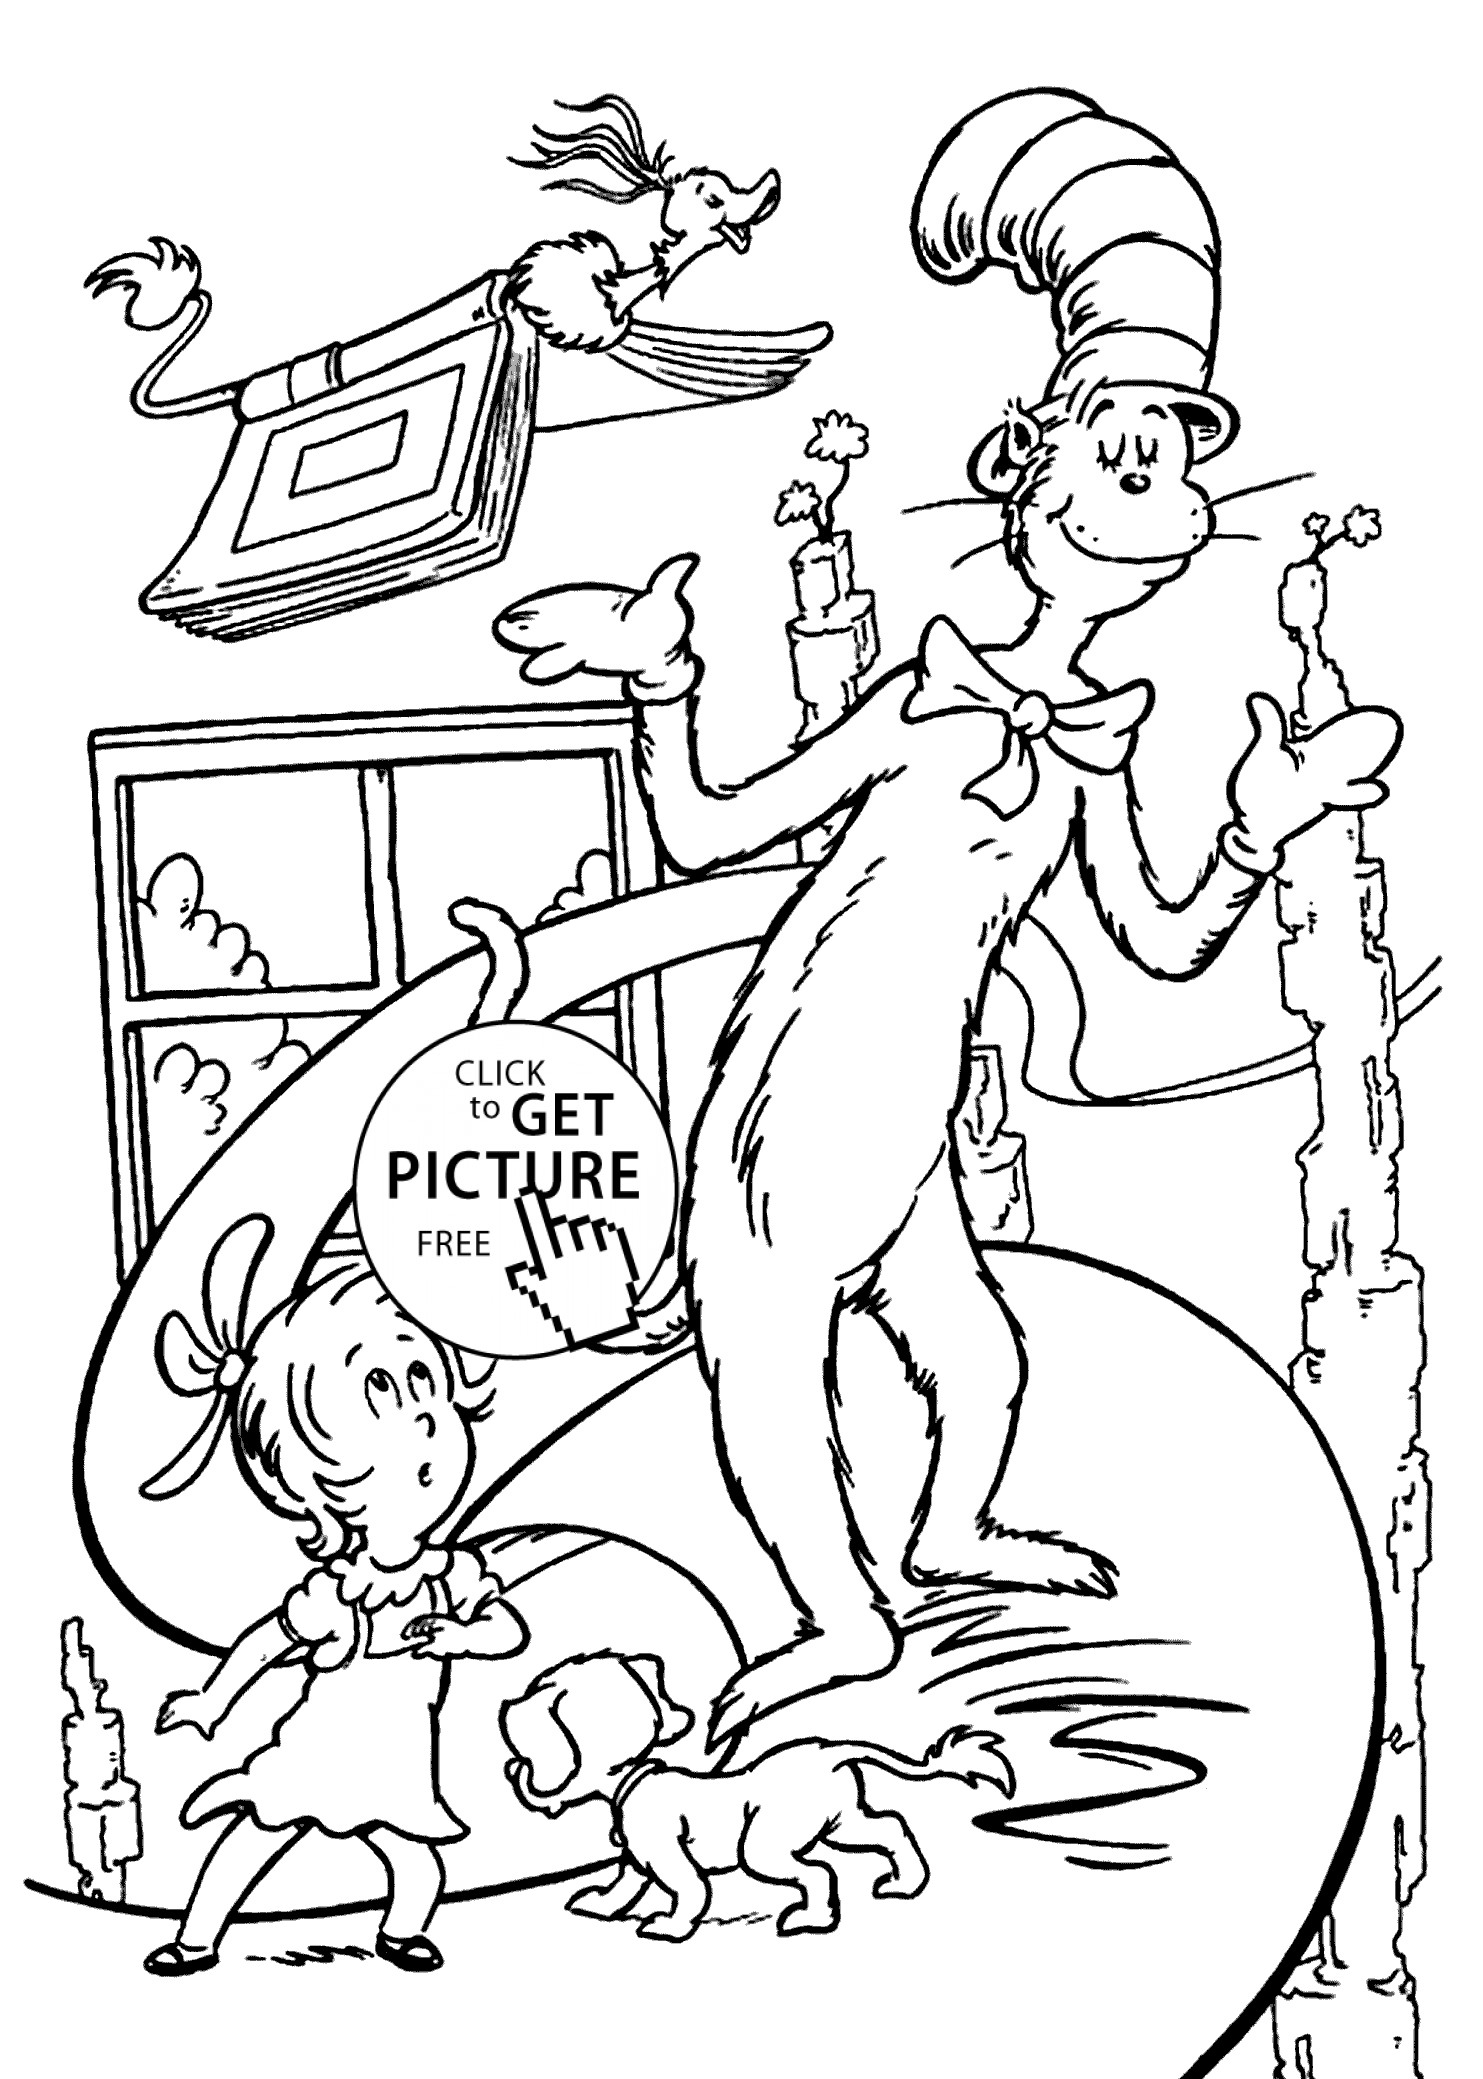 Dr Seuss Coloring Pages Printable
 Funny Сat in the hat coloring pages for kids printable